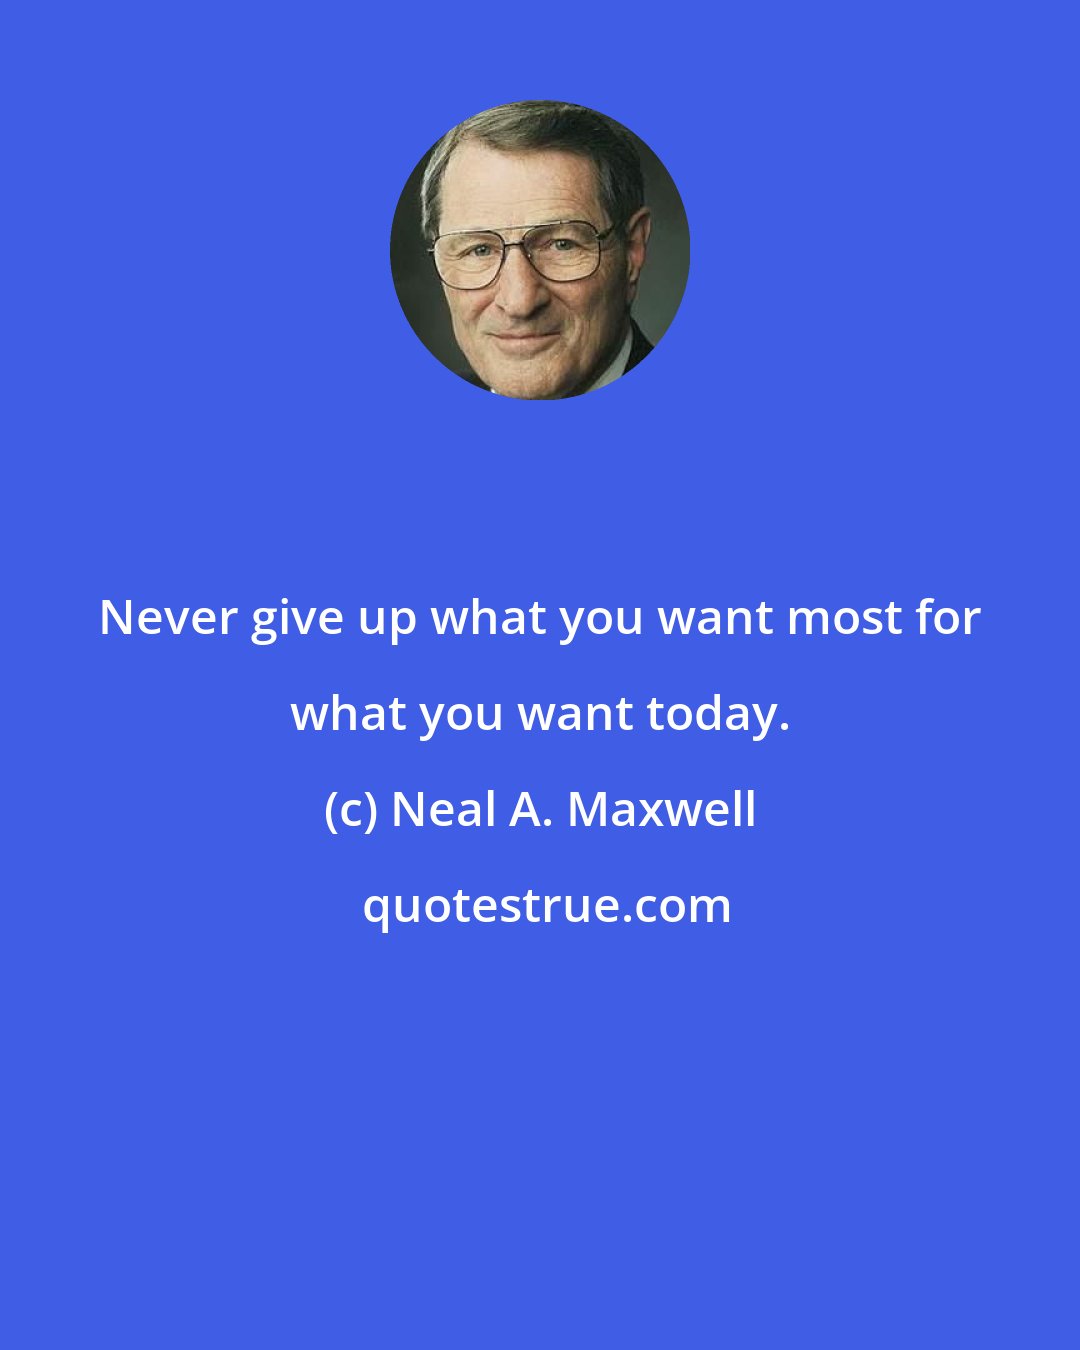 Neal A. Maxwell: Never give up what you want most for what you want today.